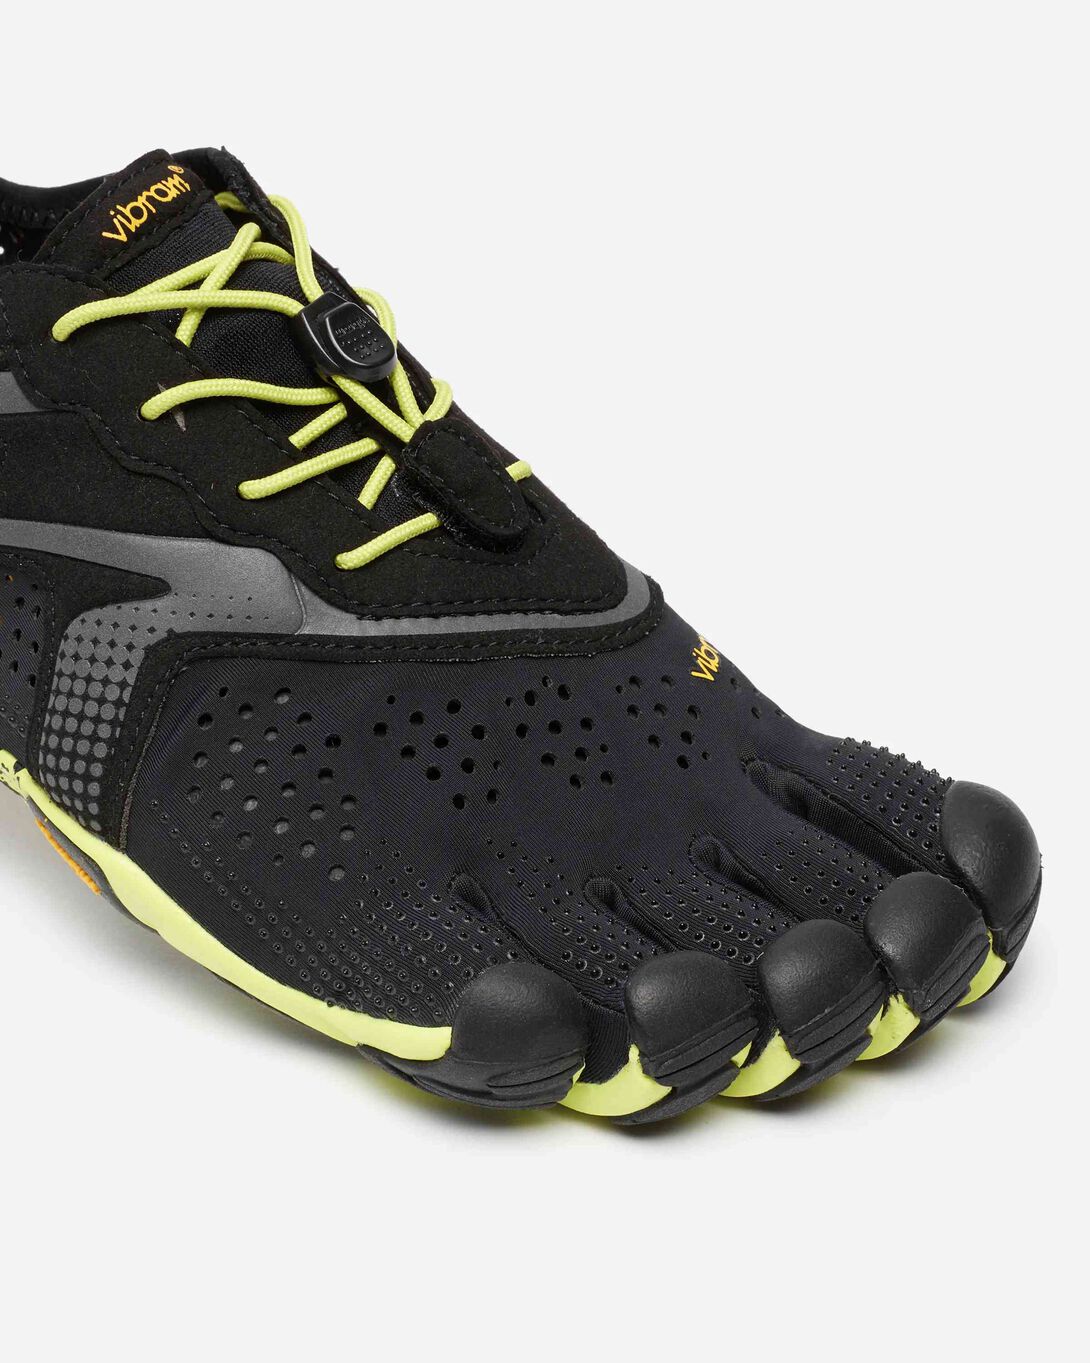 Review: Merrell True Glove Shoes (with lots of photos) - My FiveFingers